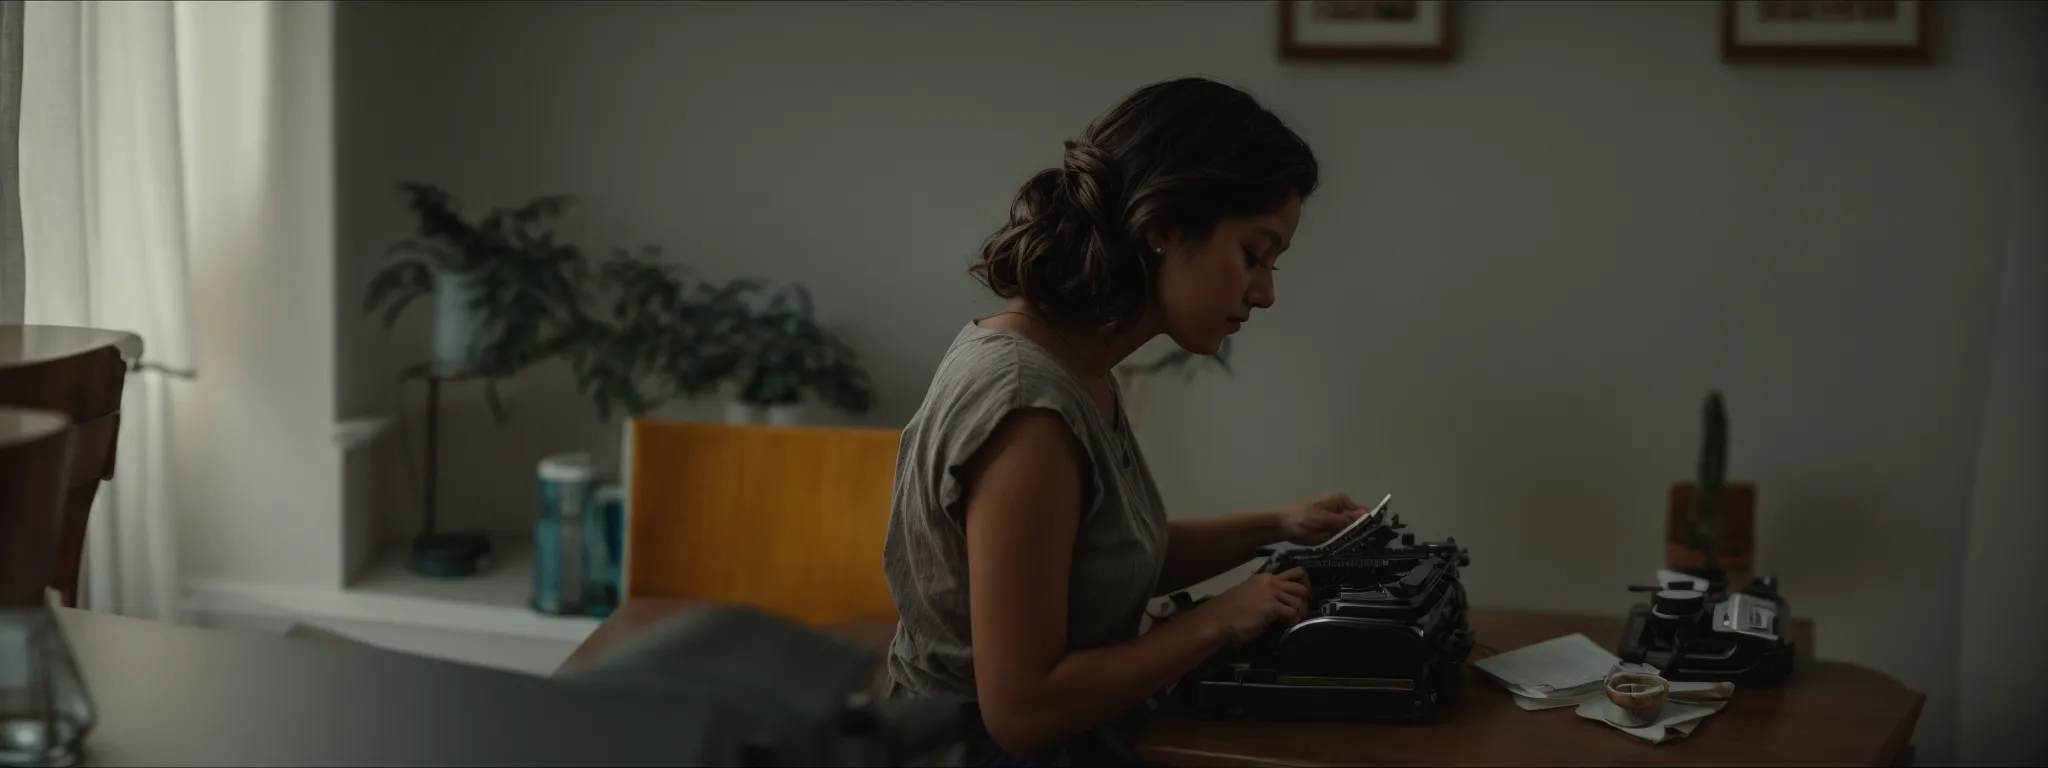 a writer thoughtfully composing on a vintage typewriter in a serene, sunlit room.